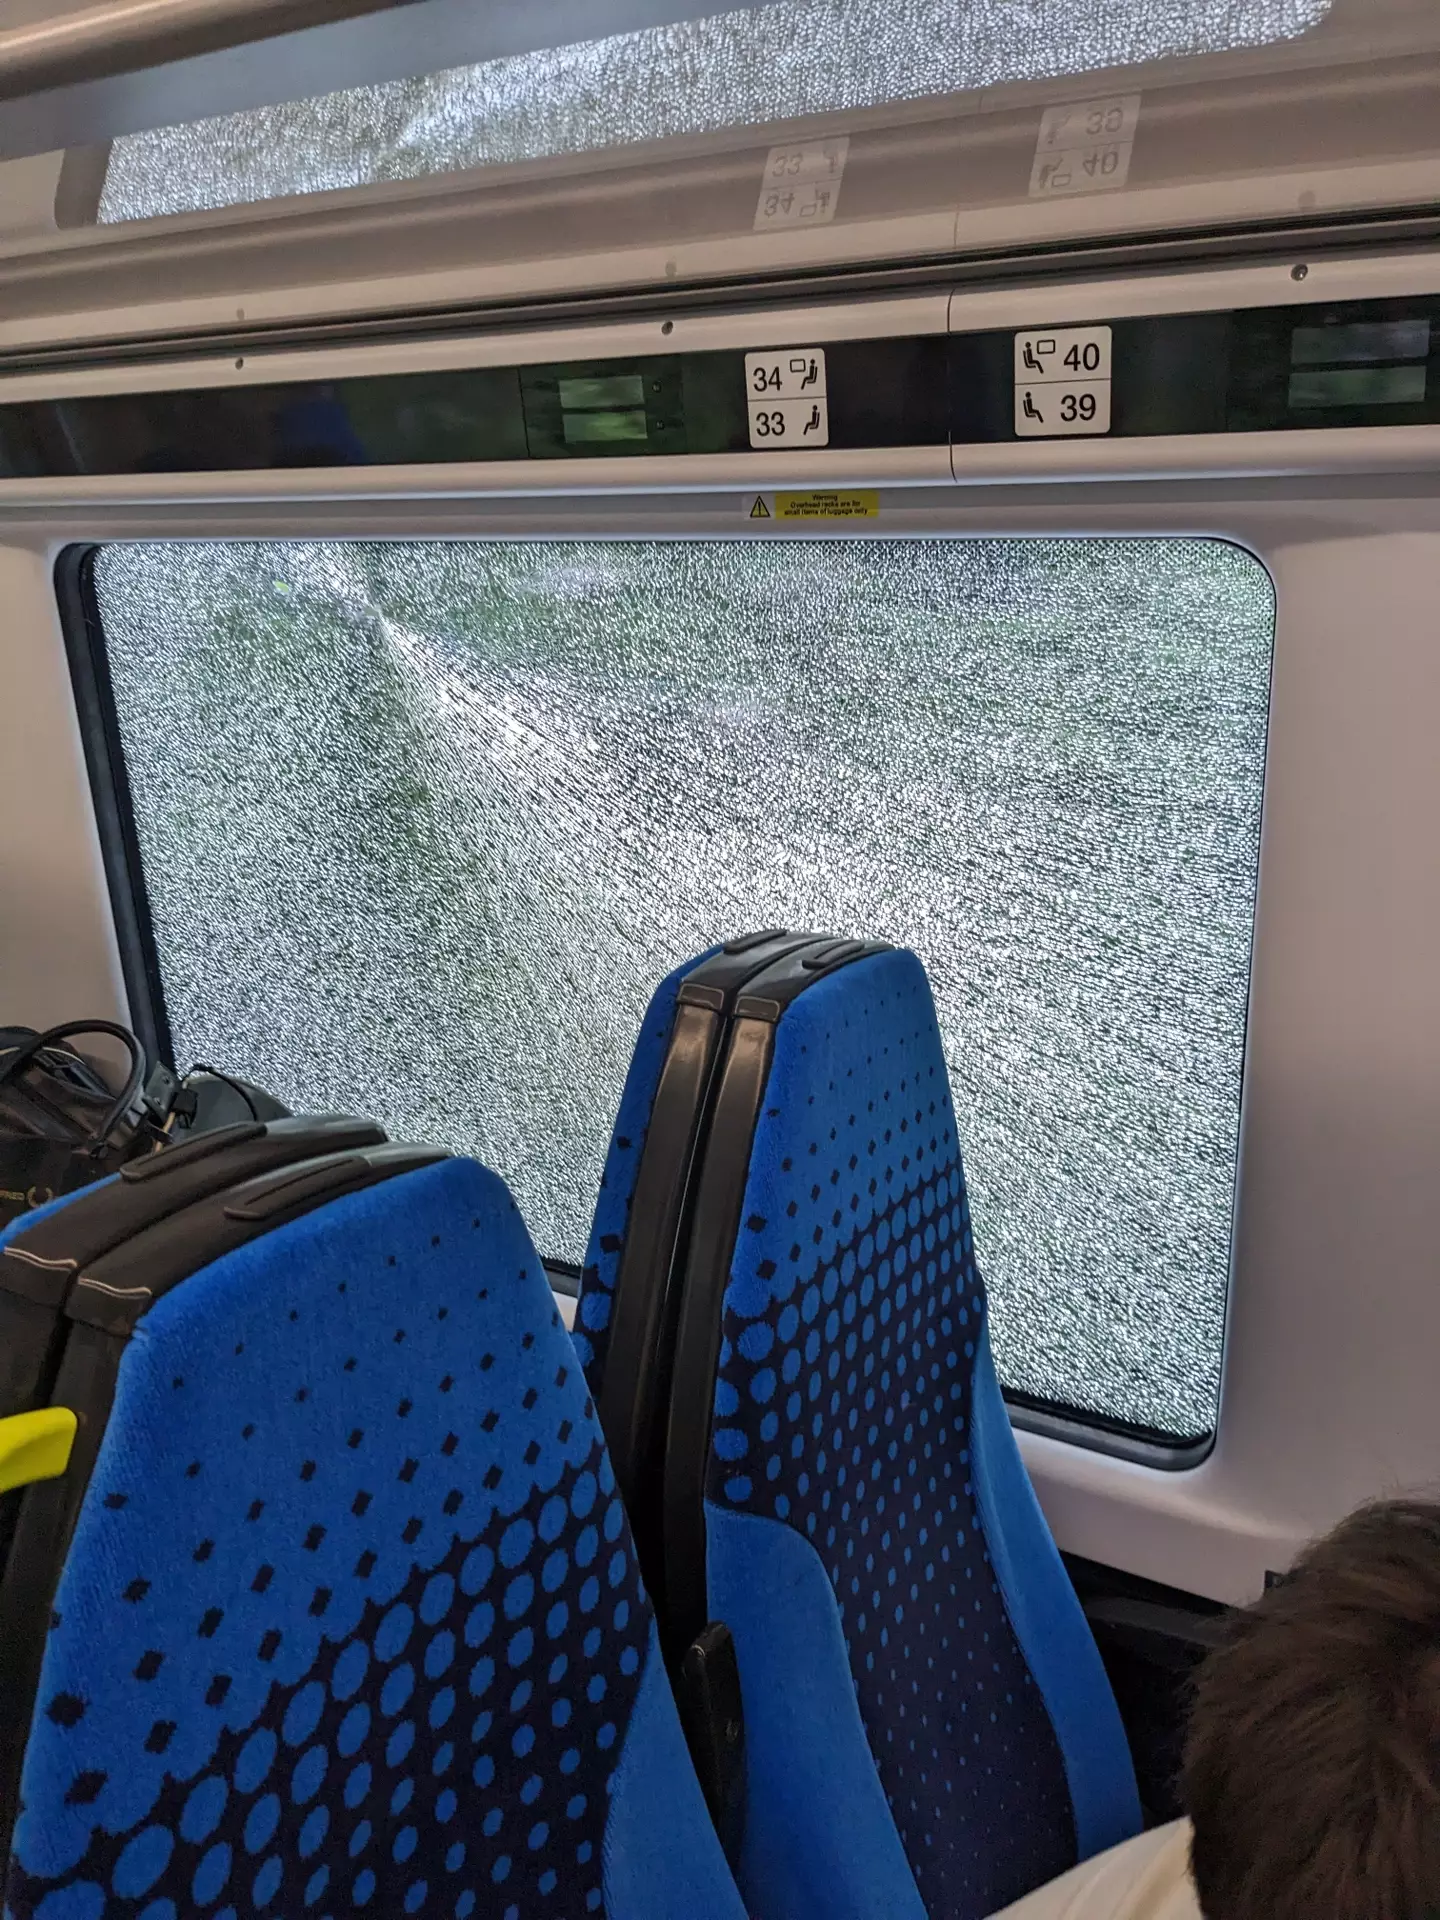 Passengers shared photos of the train.